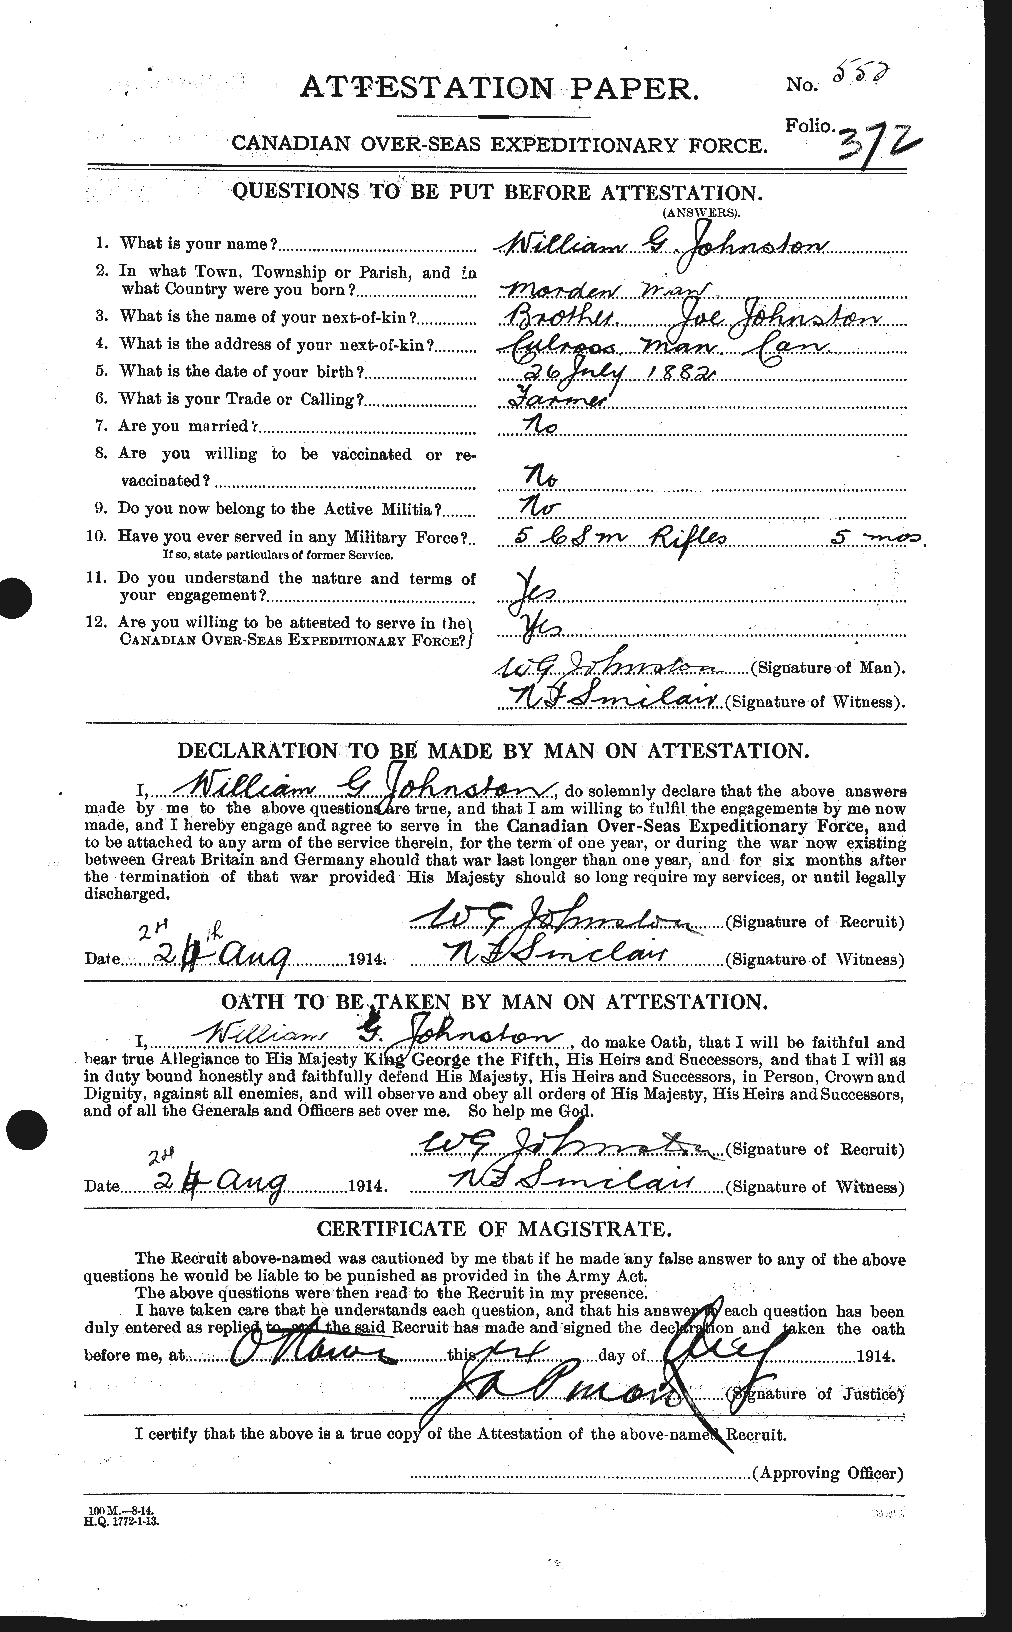 Personnel Records of the First World War - CEF 427327a